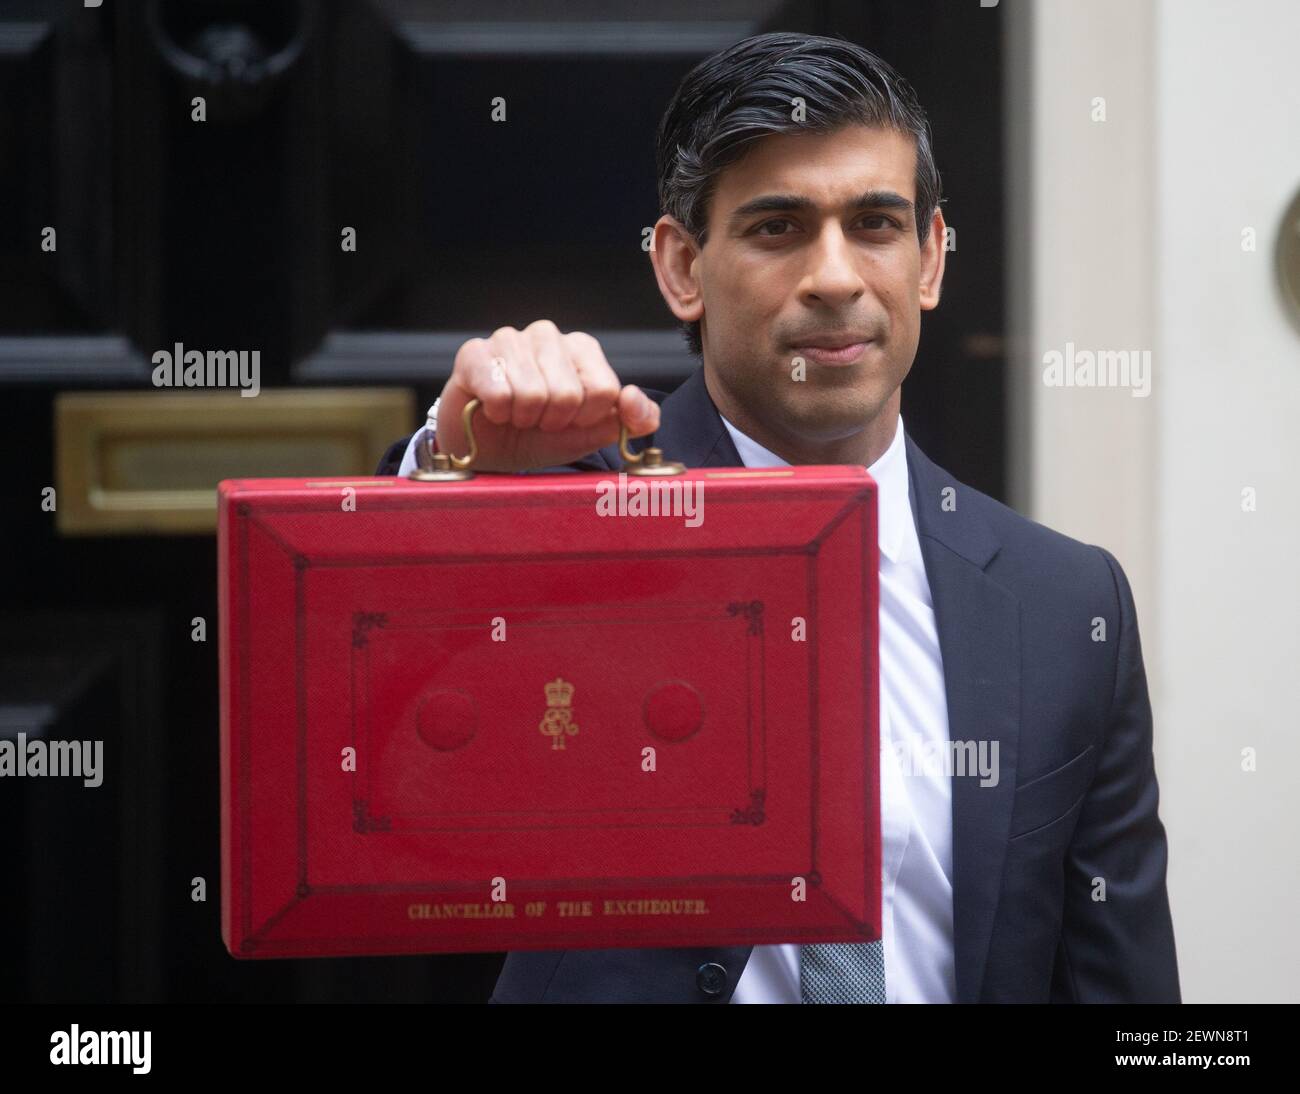 London, UK. 3rd Mar, 2021. Chancellor of the Exchequer, Rishi Sunak, leaves Number 11 Downing Street to head to the House of Commons to deliver his budget. Credit: Mark Thomas/Alamy Live News Stock Photo